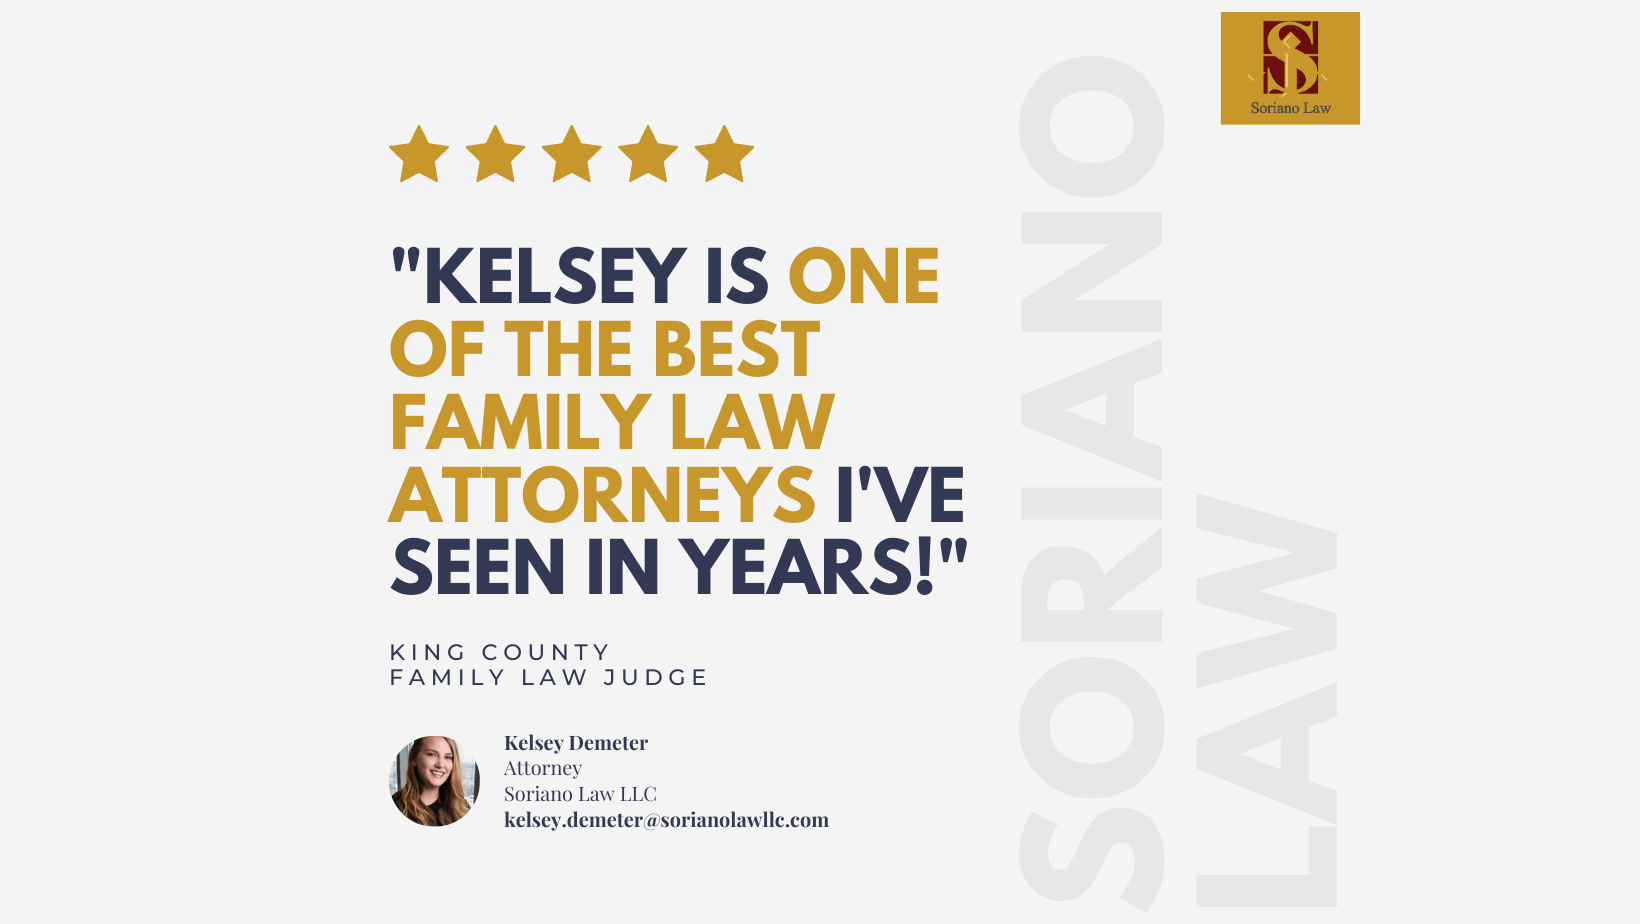 ‘ONE OF THE BEST FAMILY LAW ATTORNEYS’ – KING COUNTY JUDGE